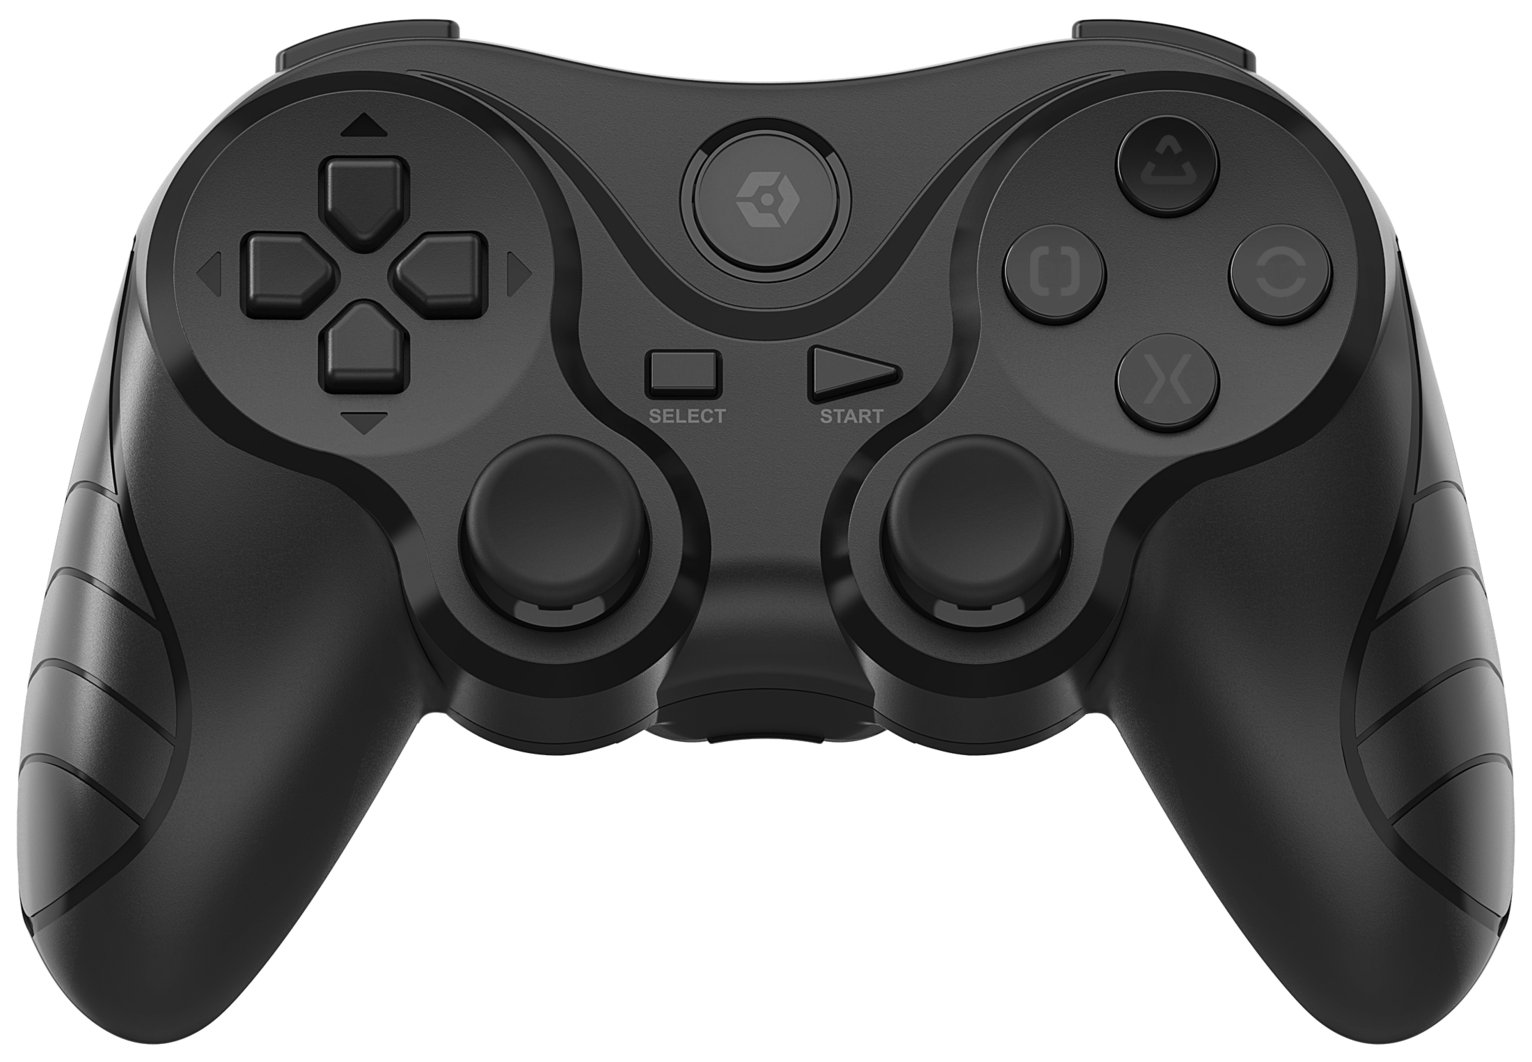 Gioteck VX3 Wireless PS3 Controller Review